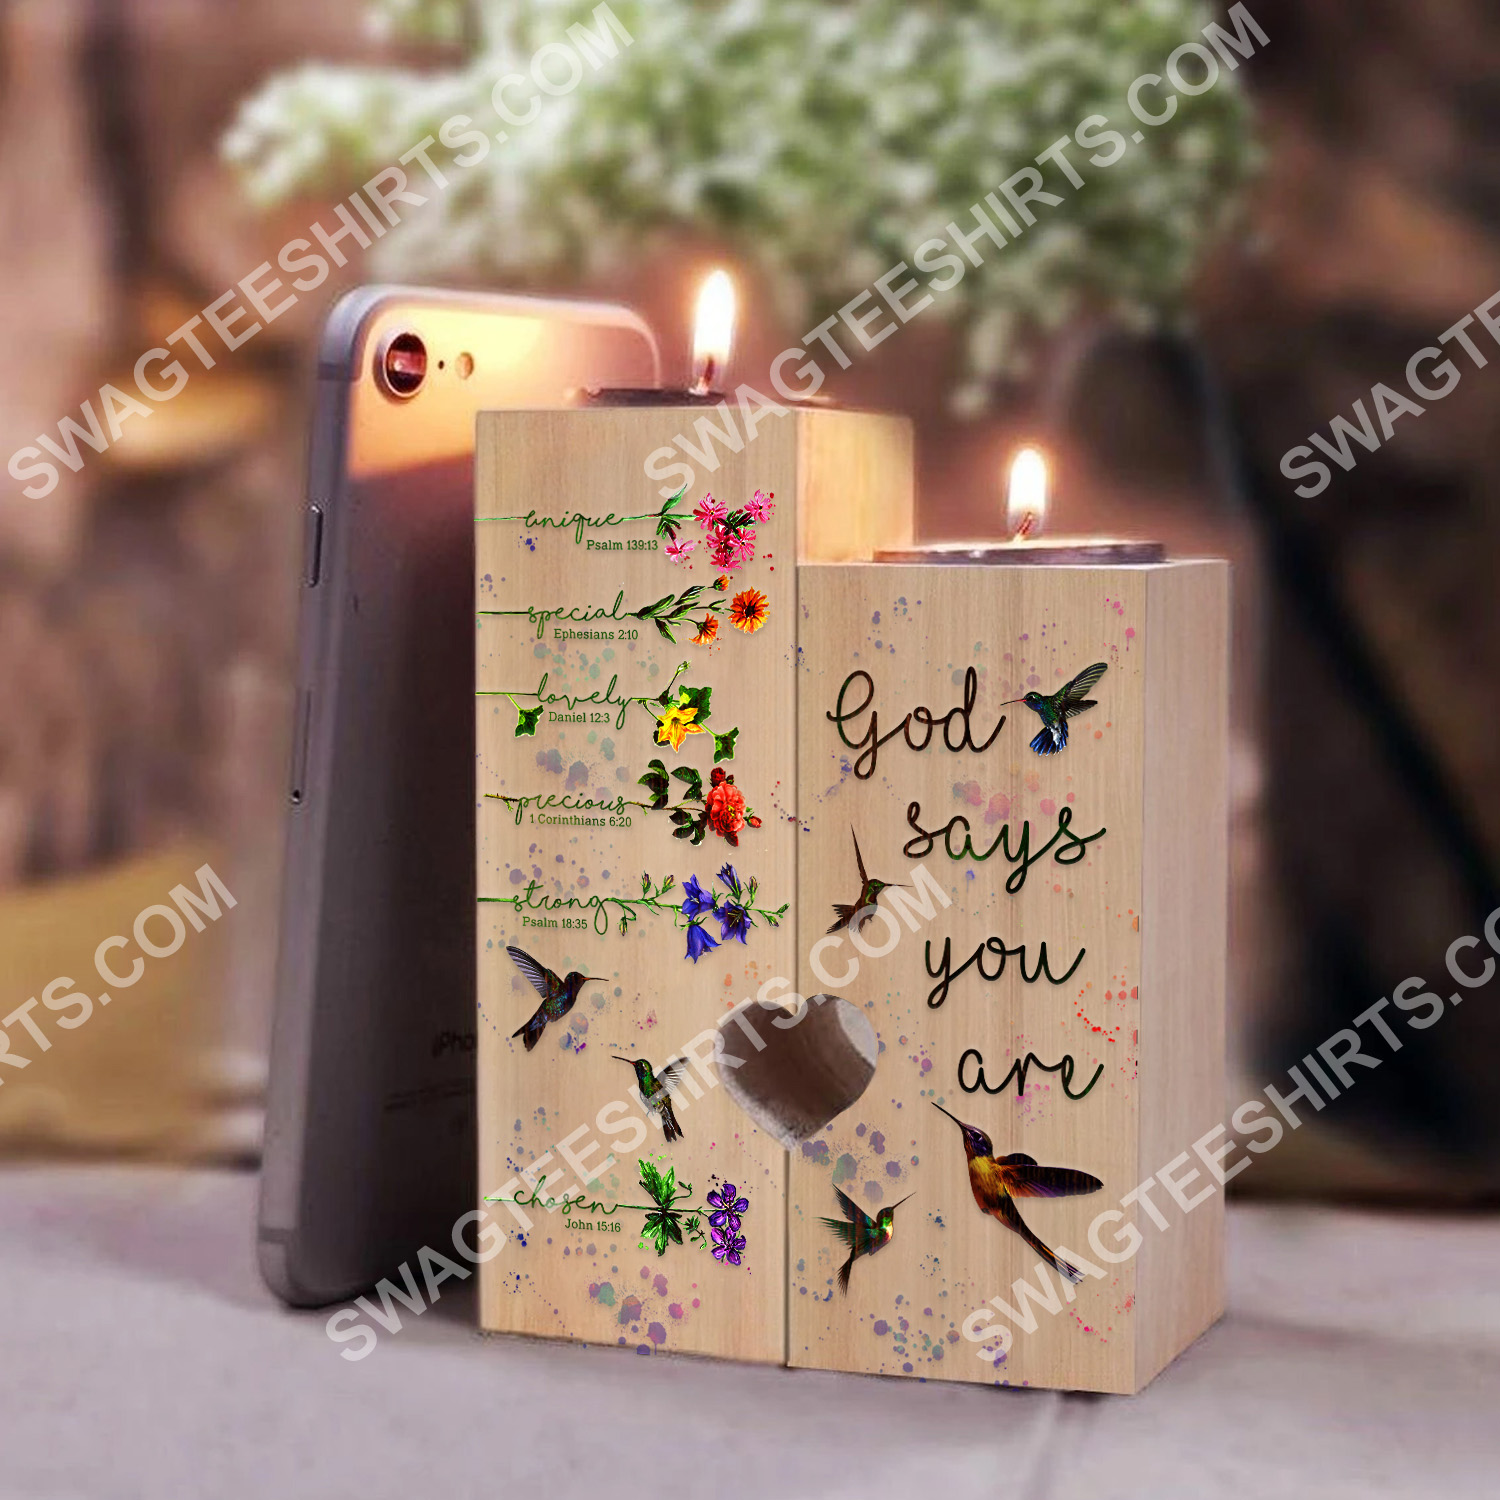 God say you are unique special lovely precious strong candle holder 2(1)